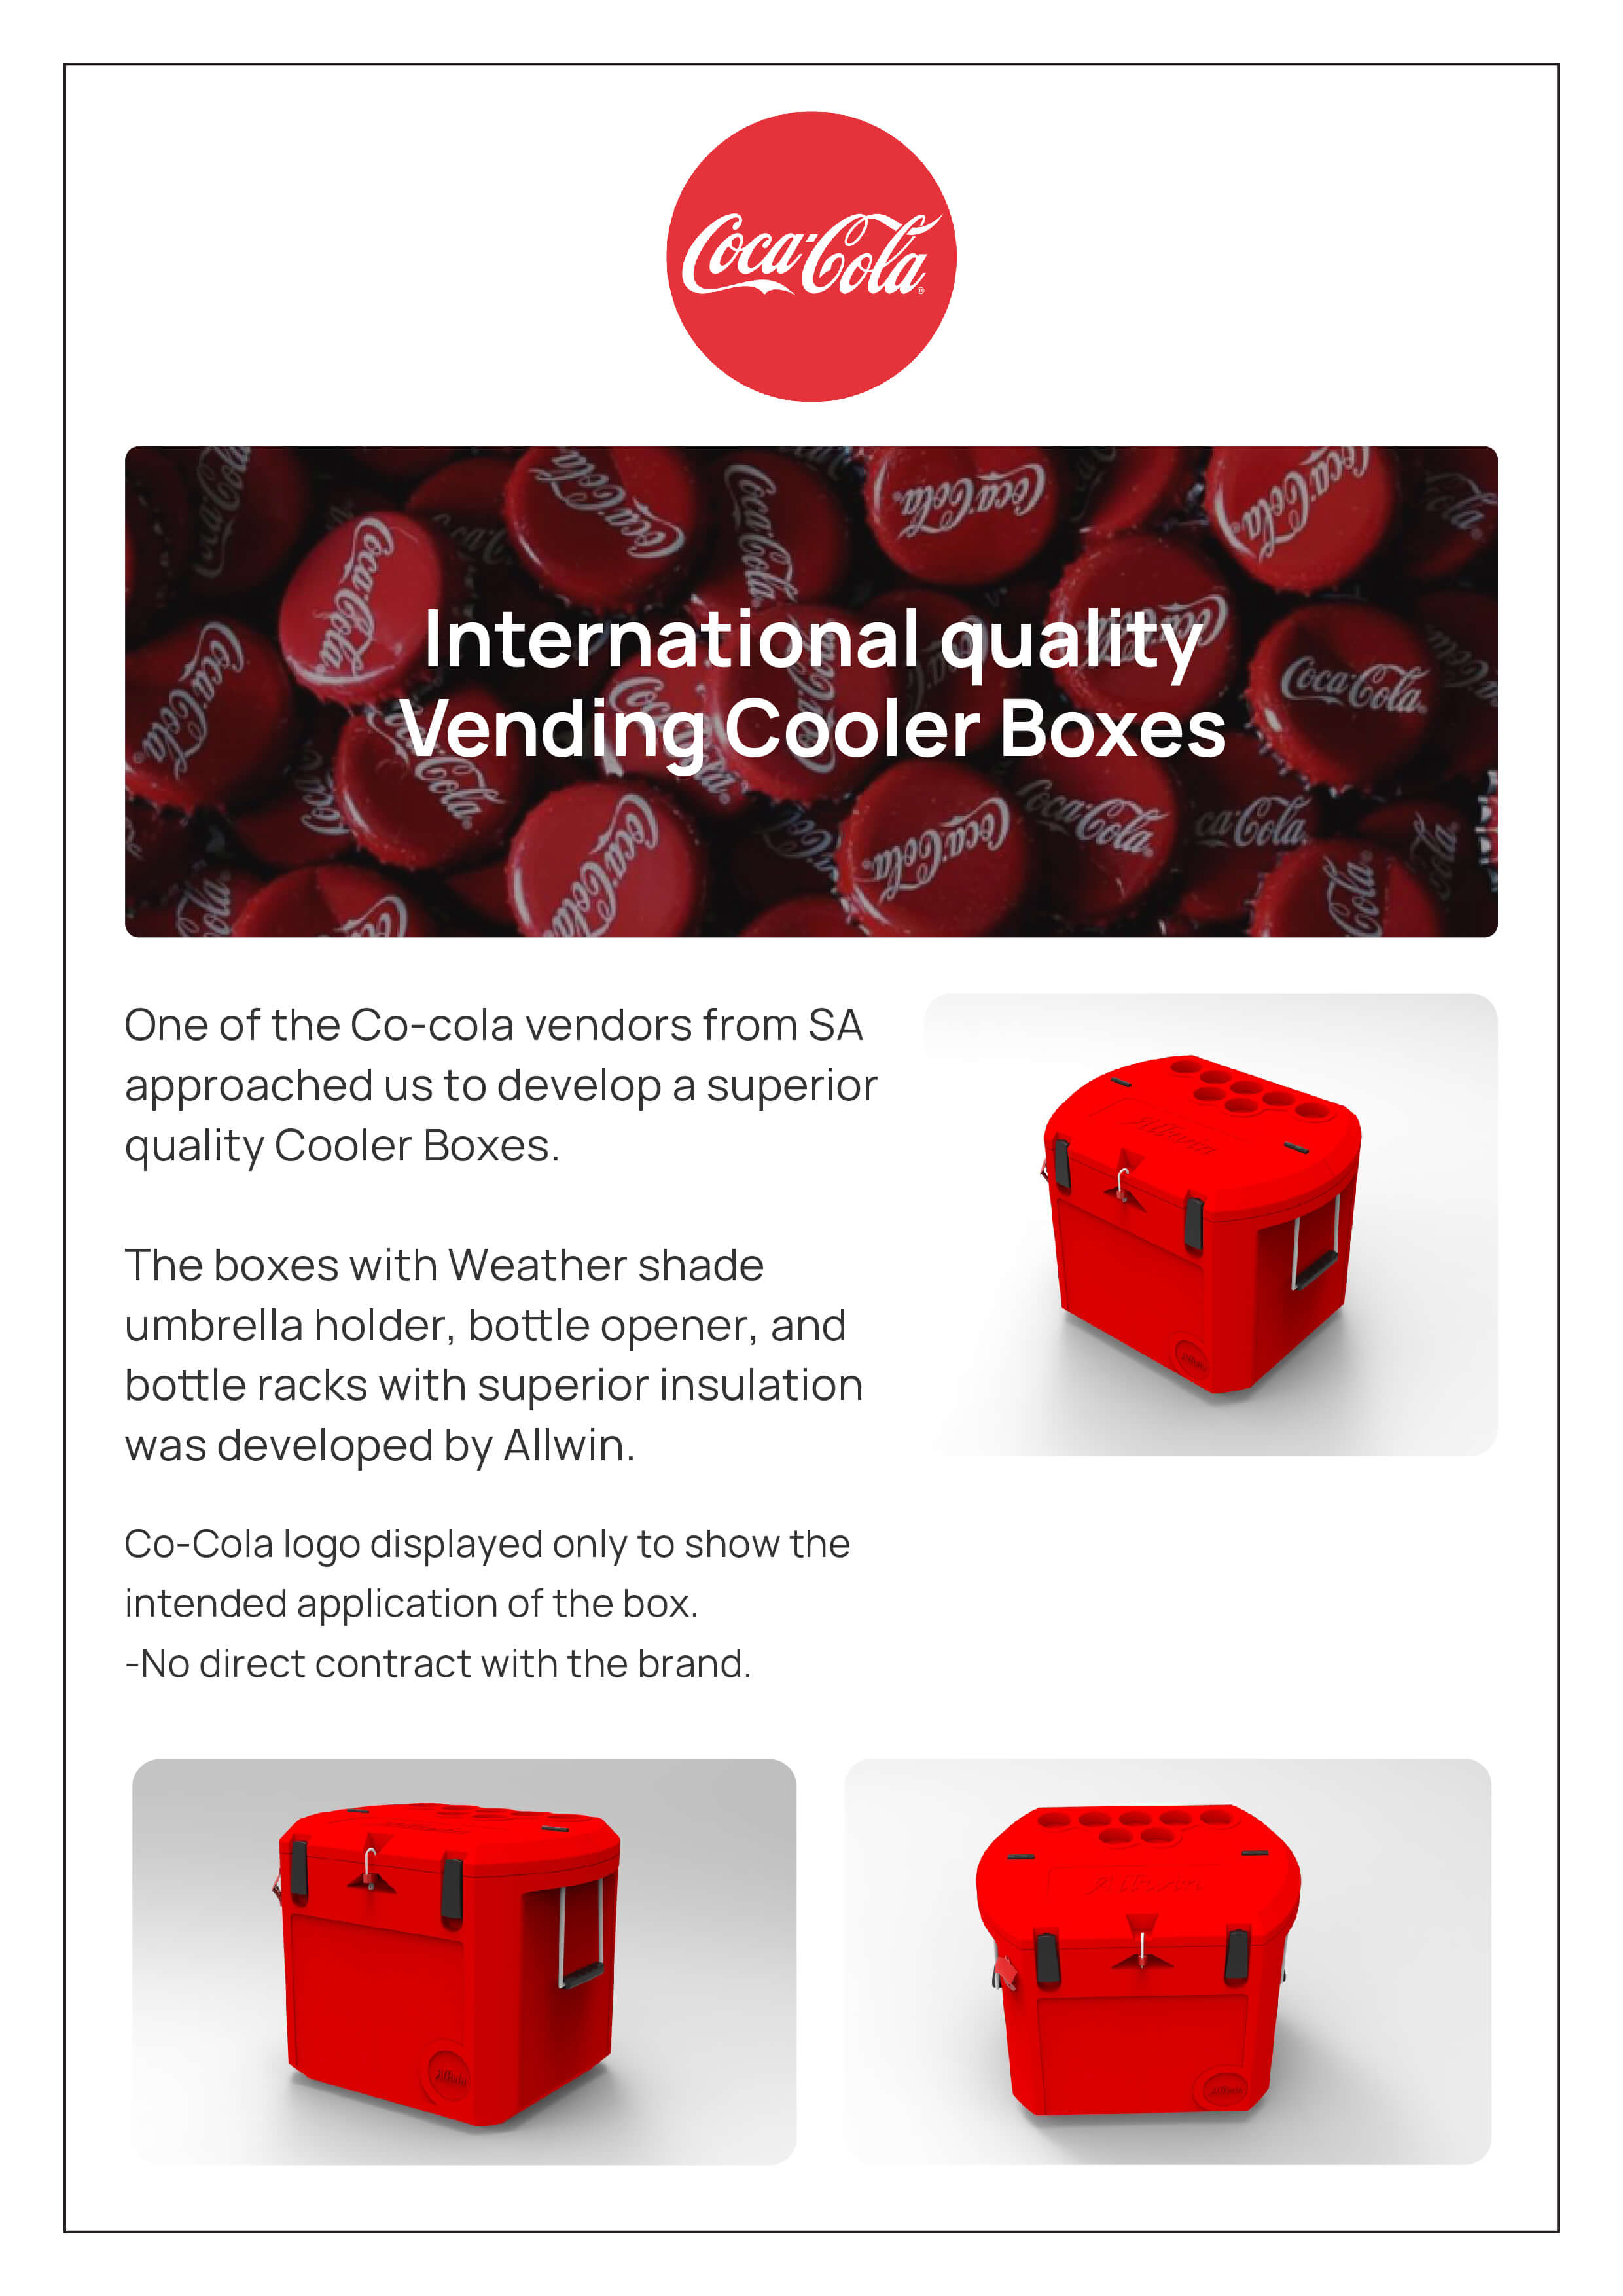 Cocacola : International Quality Vending Cooler Boxes